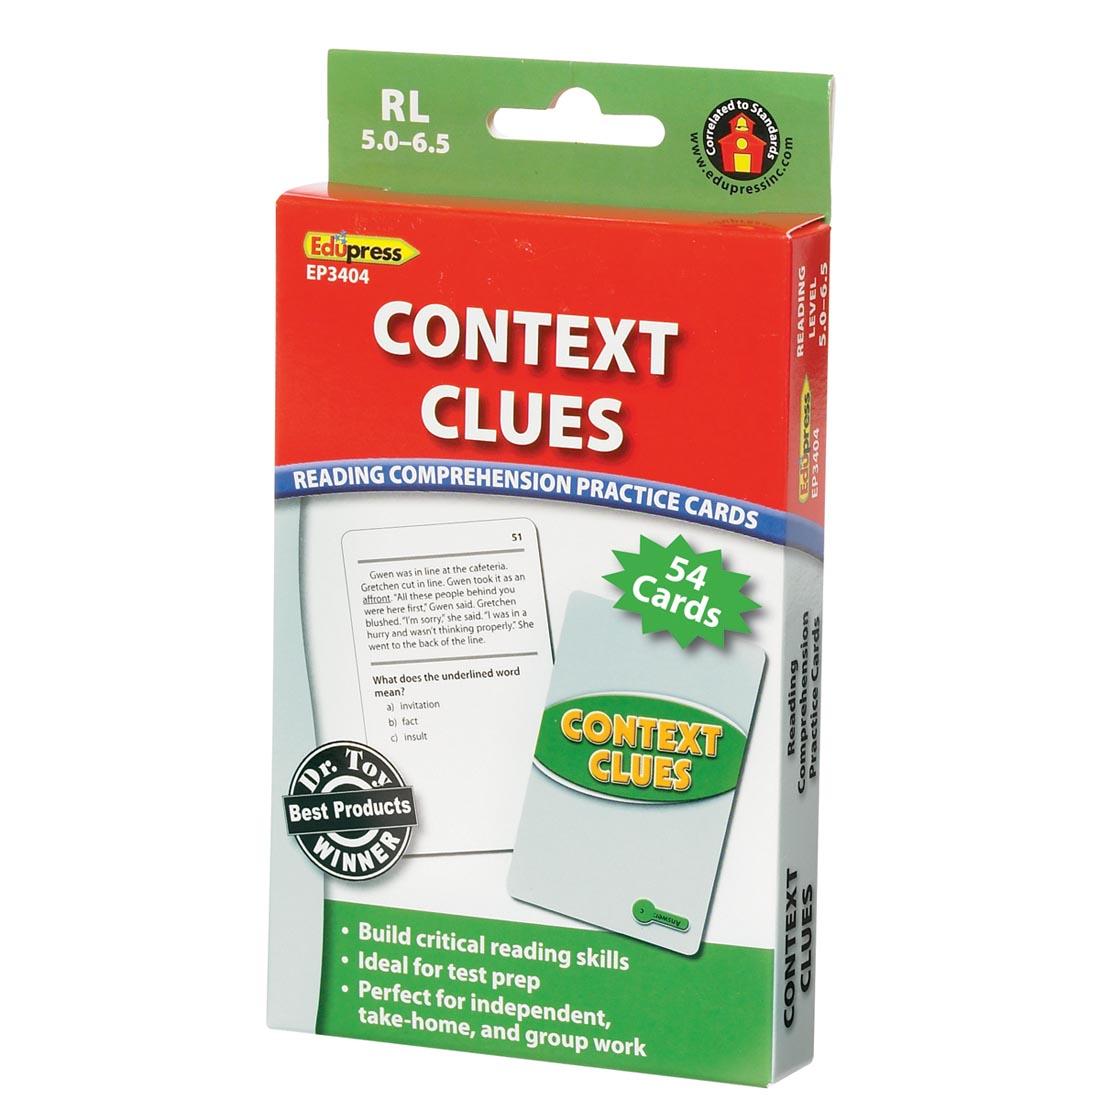 Green Level Context Clues Reading Comprehension Practice Cards